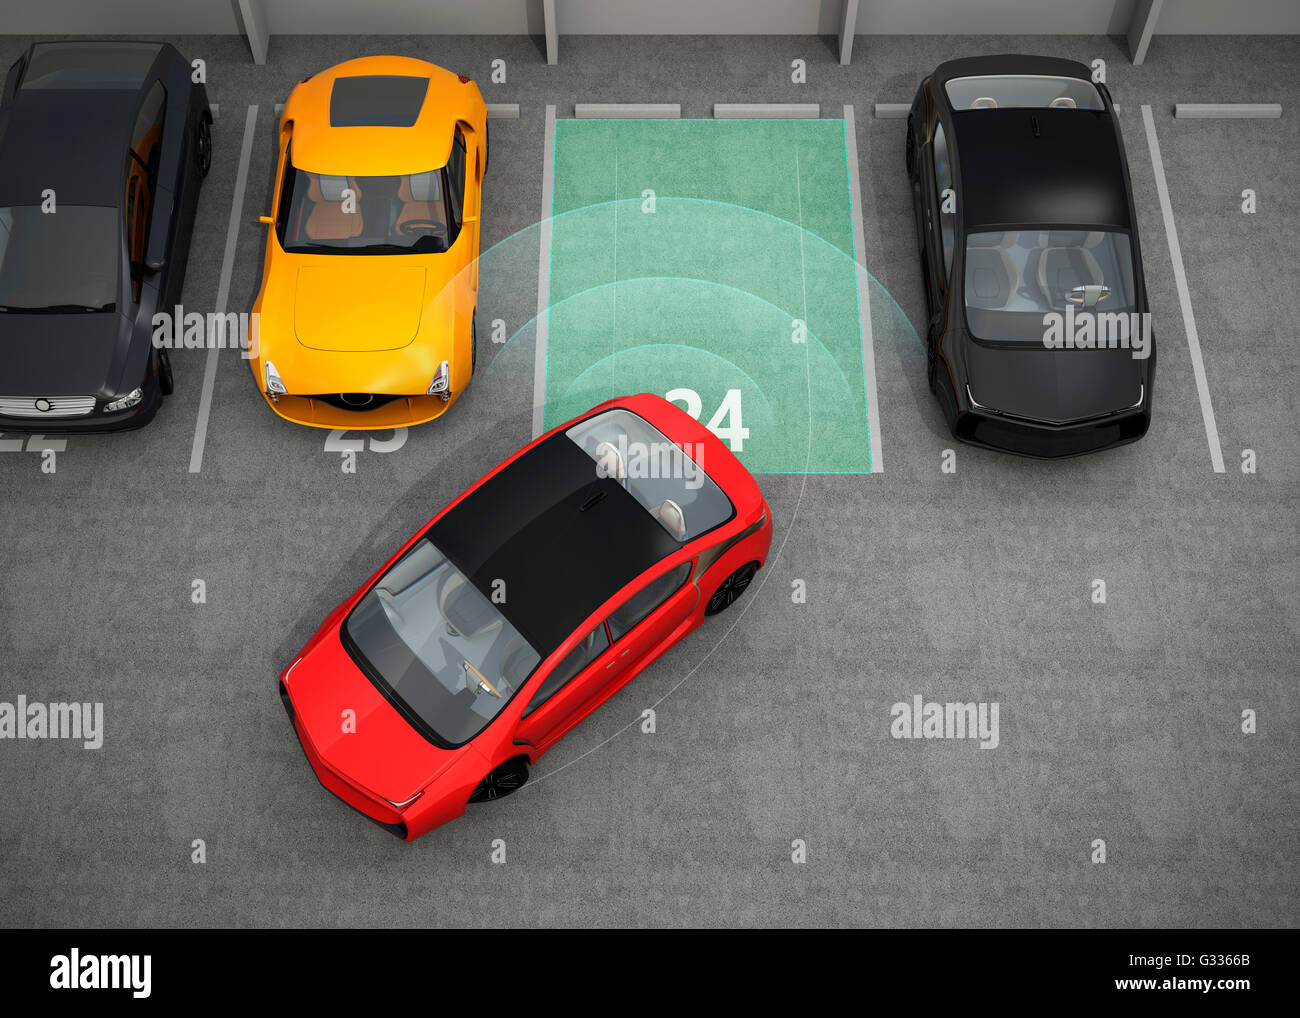 Red electric car driving into parking lot with parking assist system. 3D rendering image. Stock Photo